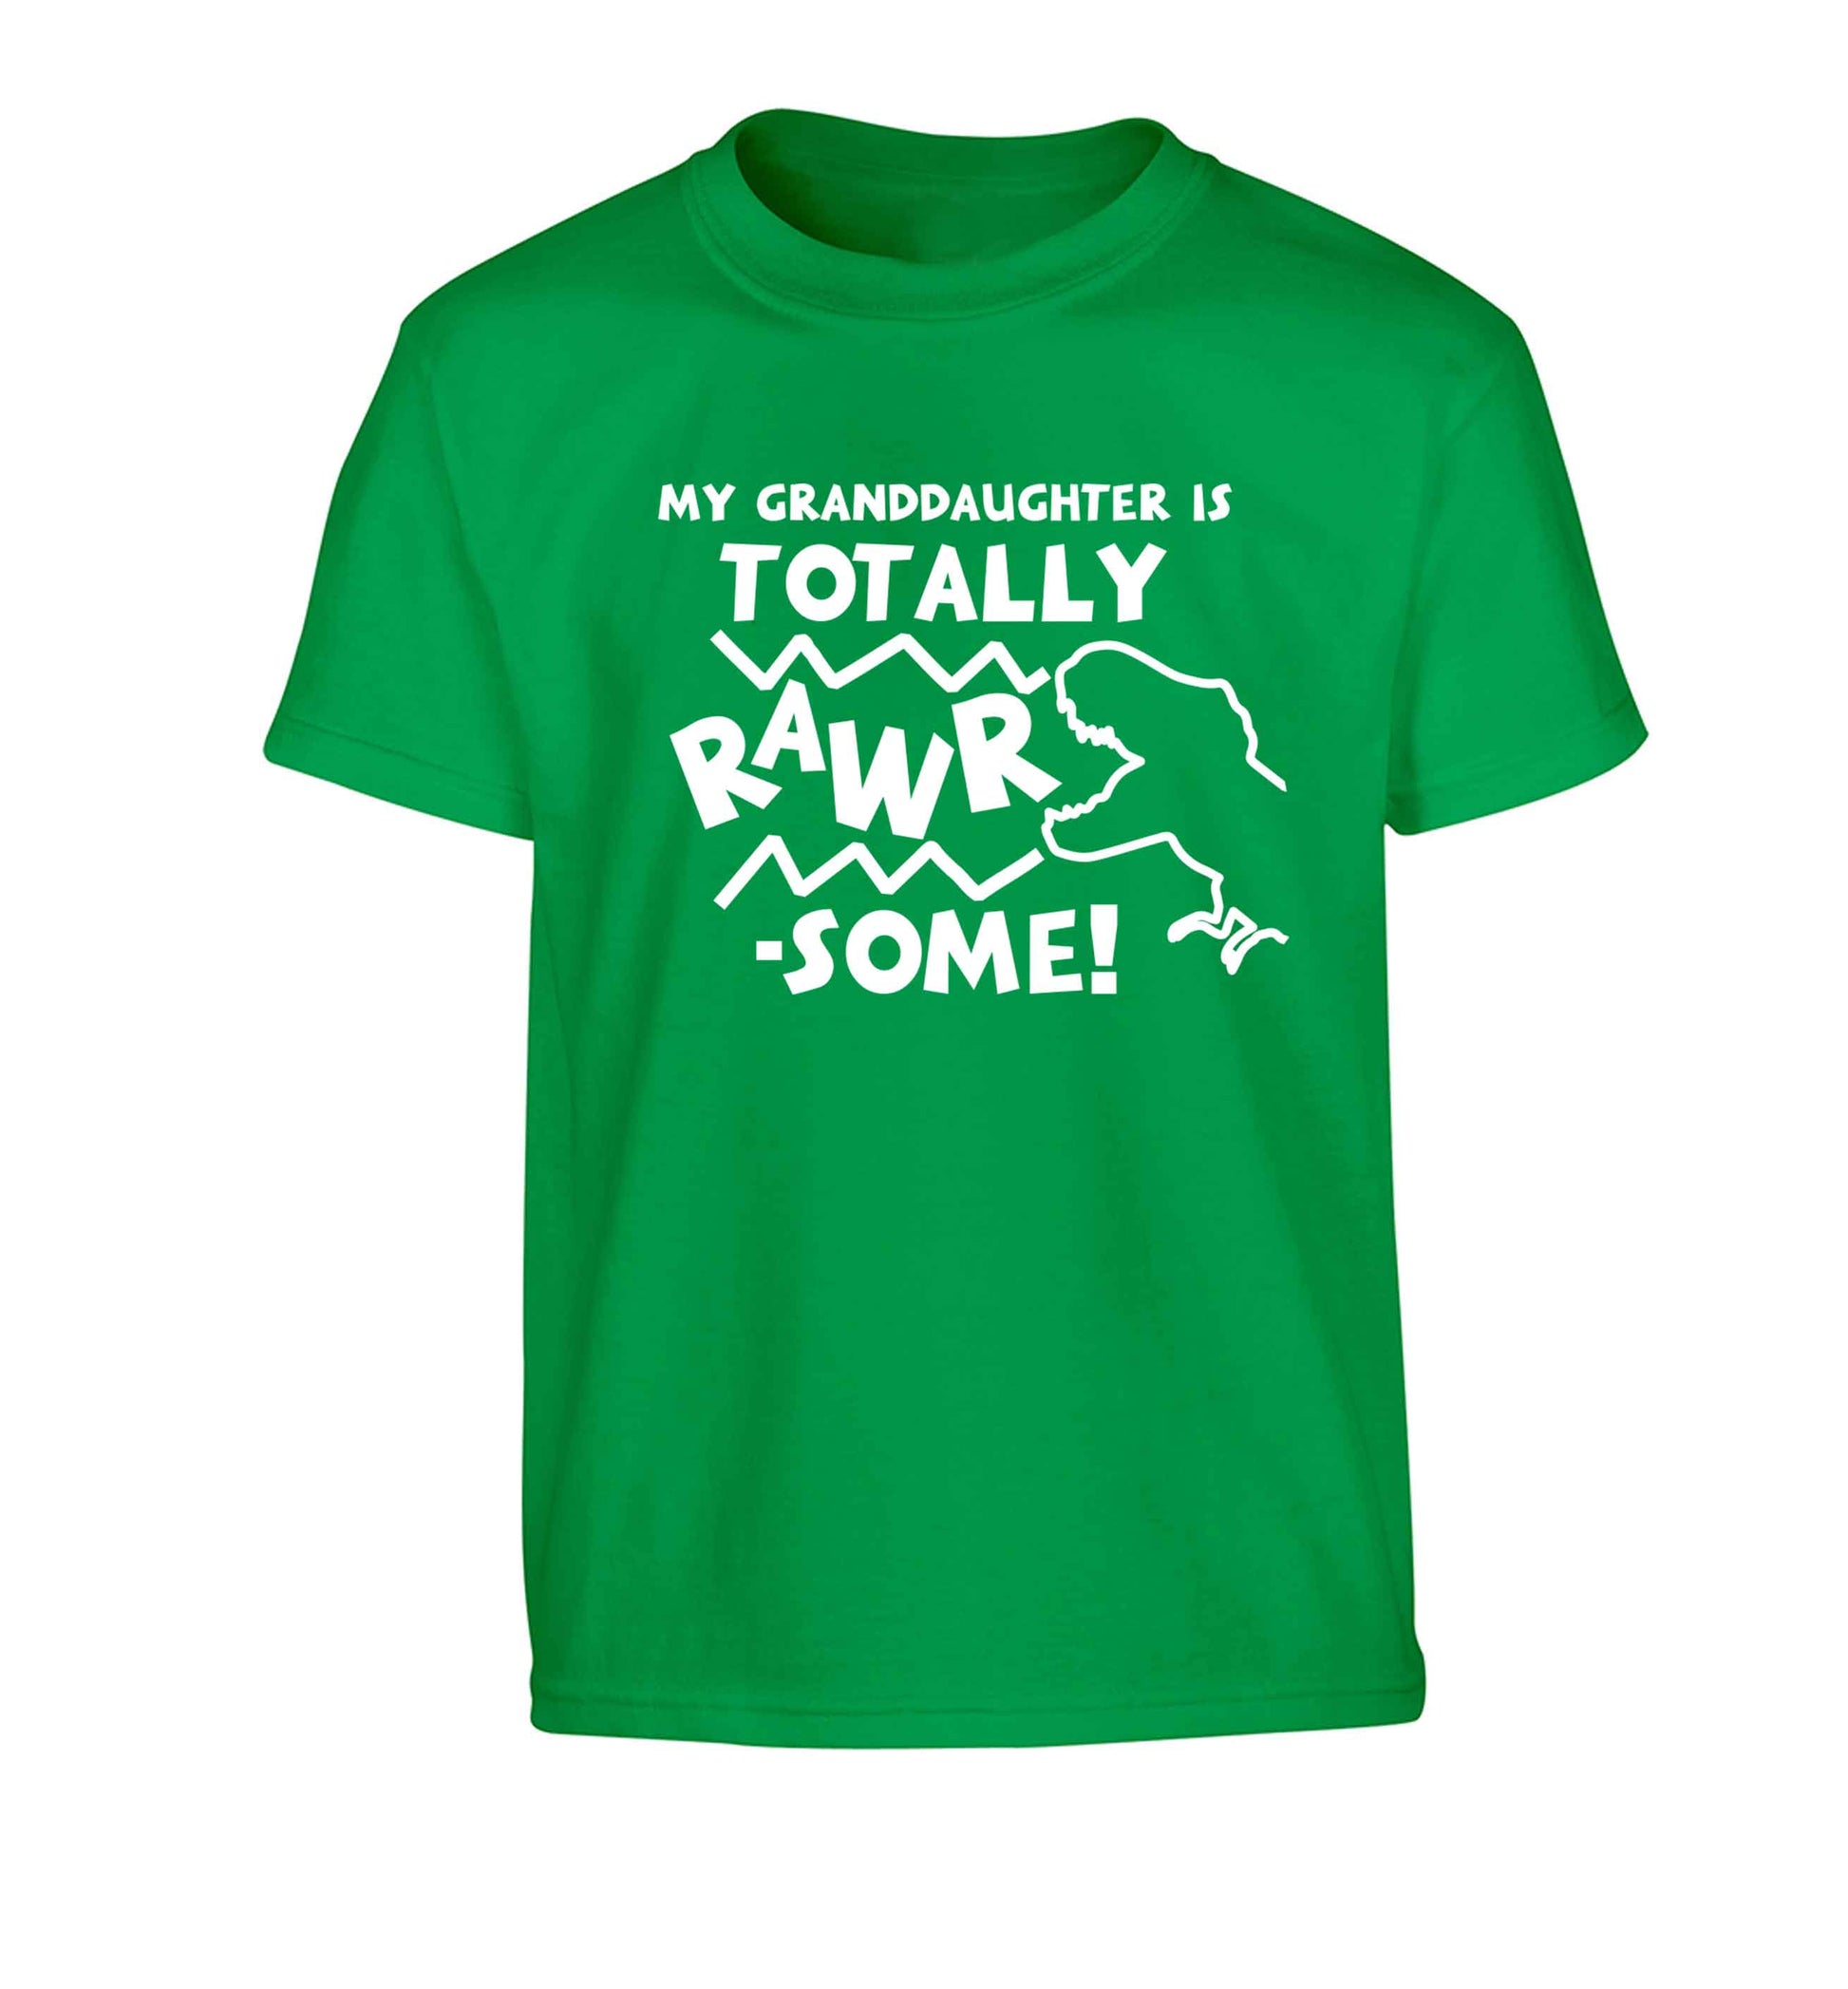 My granddaughter is totally rawrsome Children's green Tshirt 12-13 Years